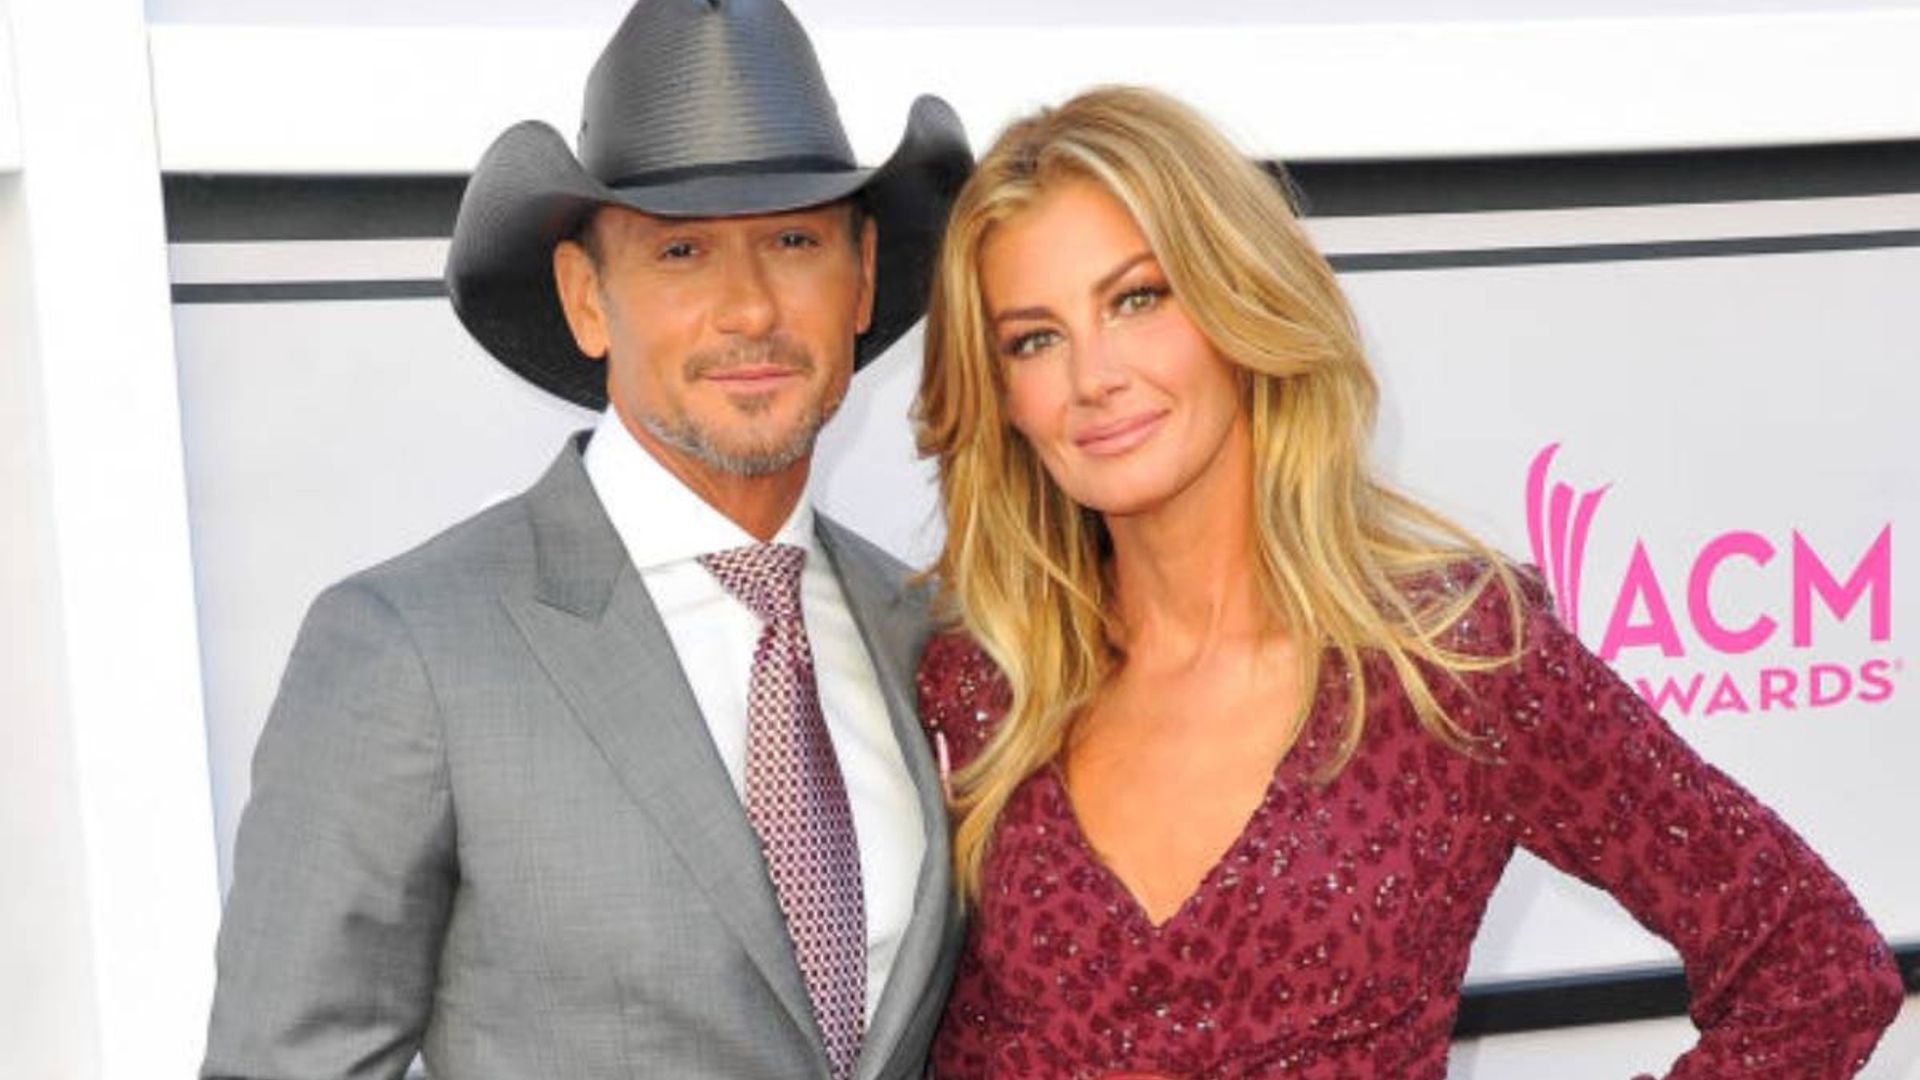 Tim McGraw and Faith Hill at the ACM Awards